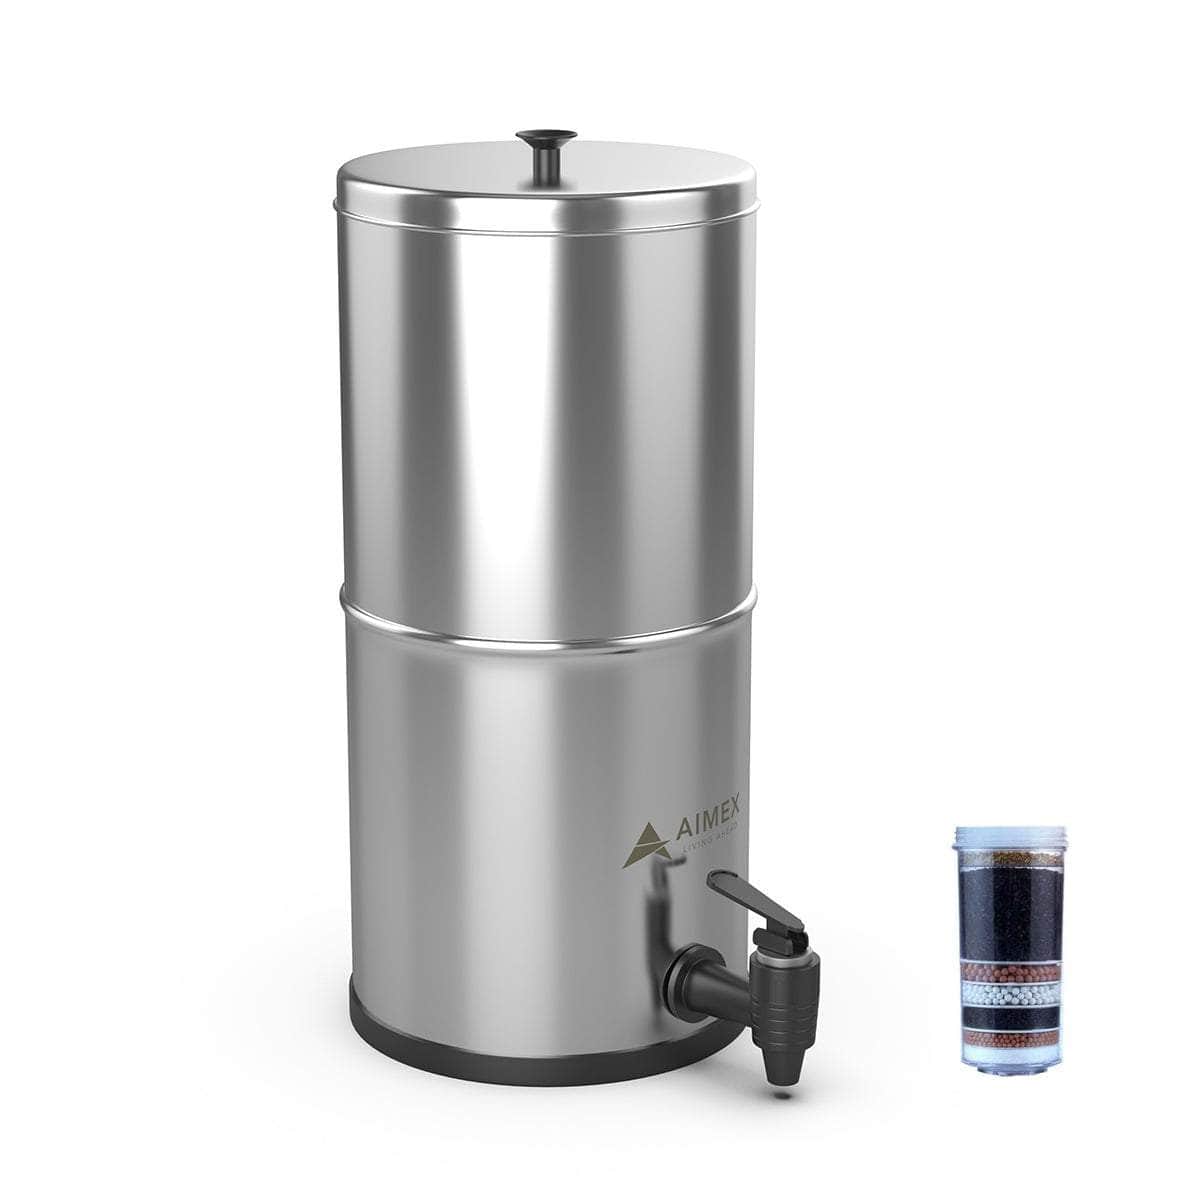 Water Stainless Steel 304 Water Filter System - 8 Stage